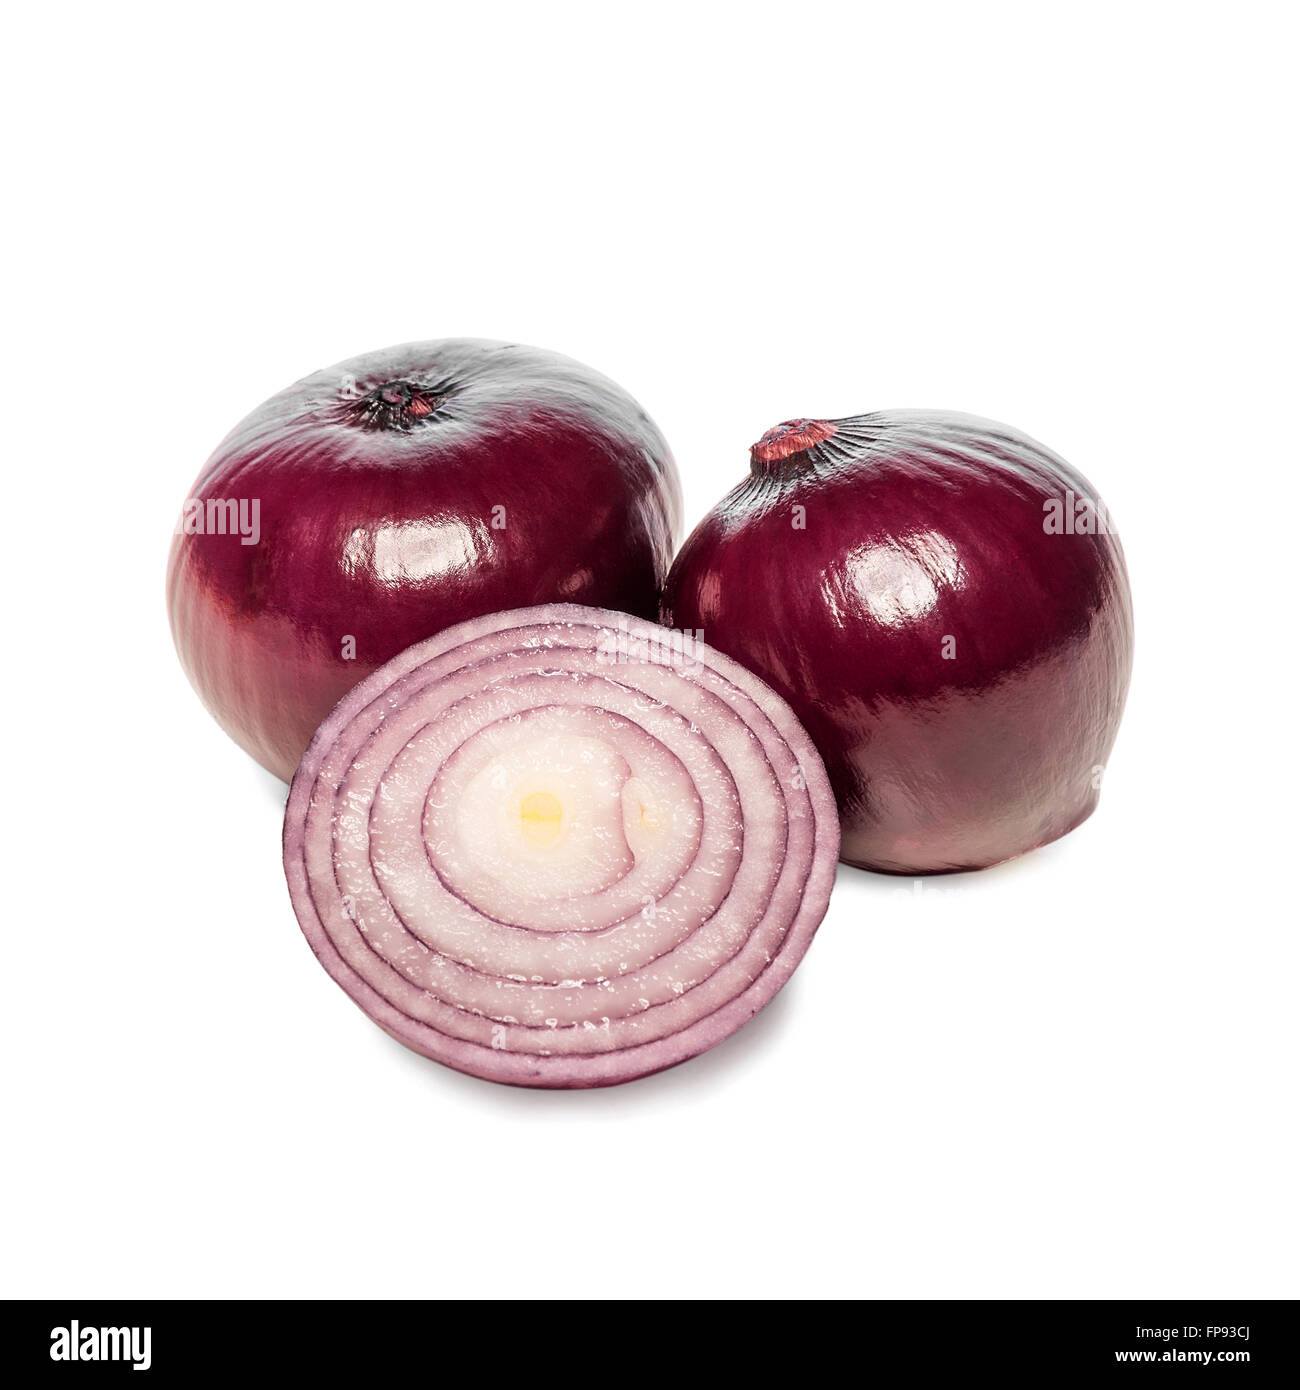 Red onion on a white background. Stock Photo